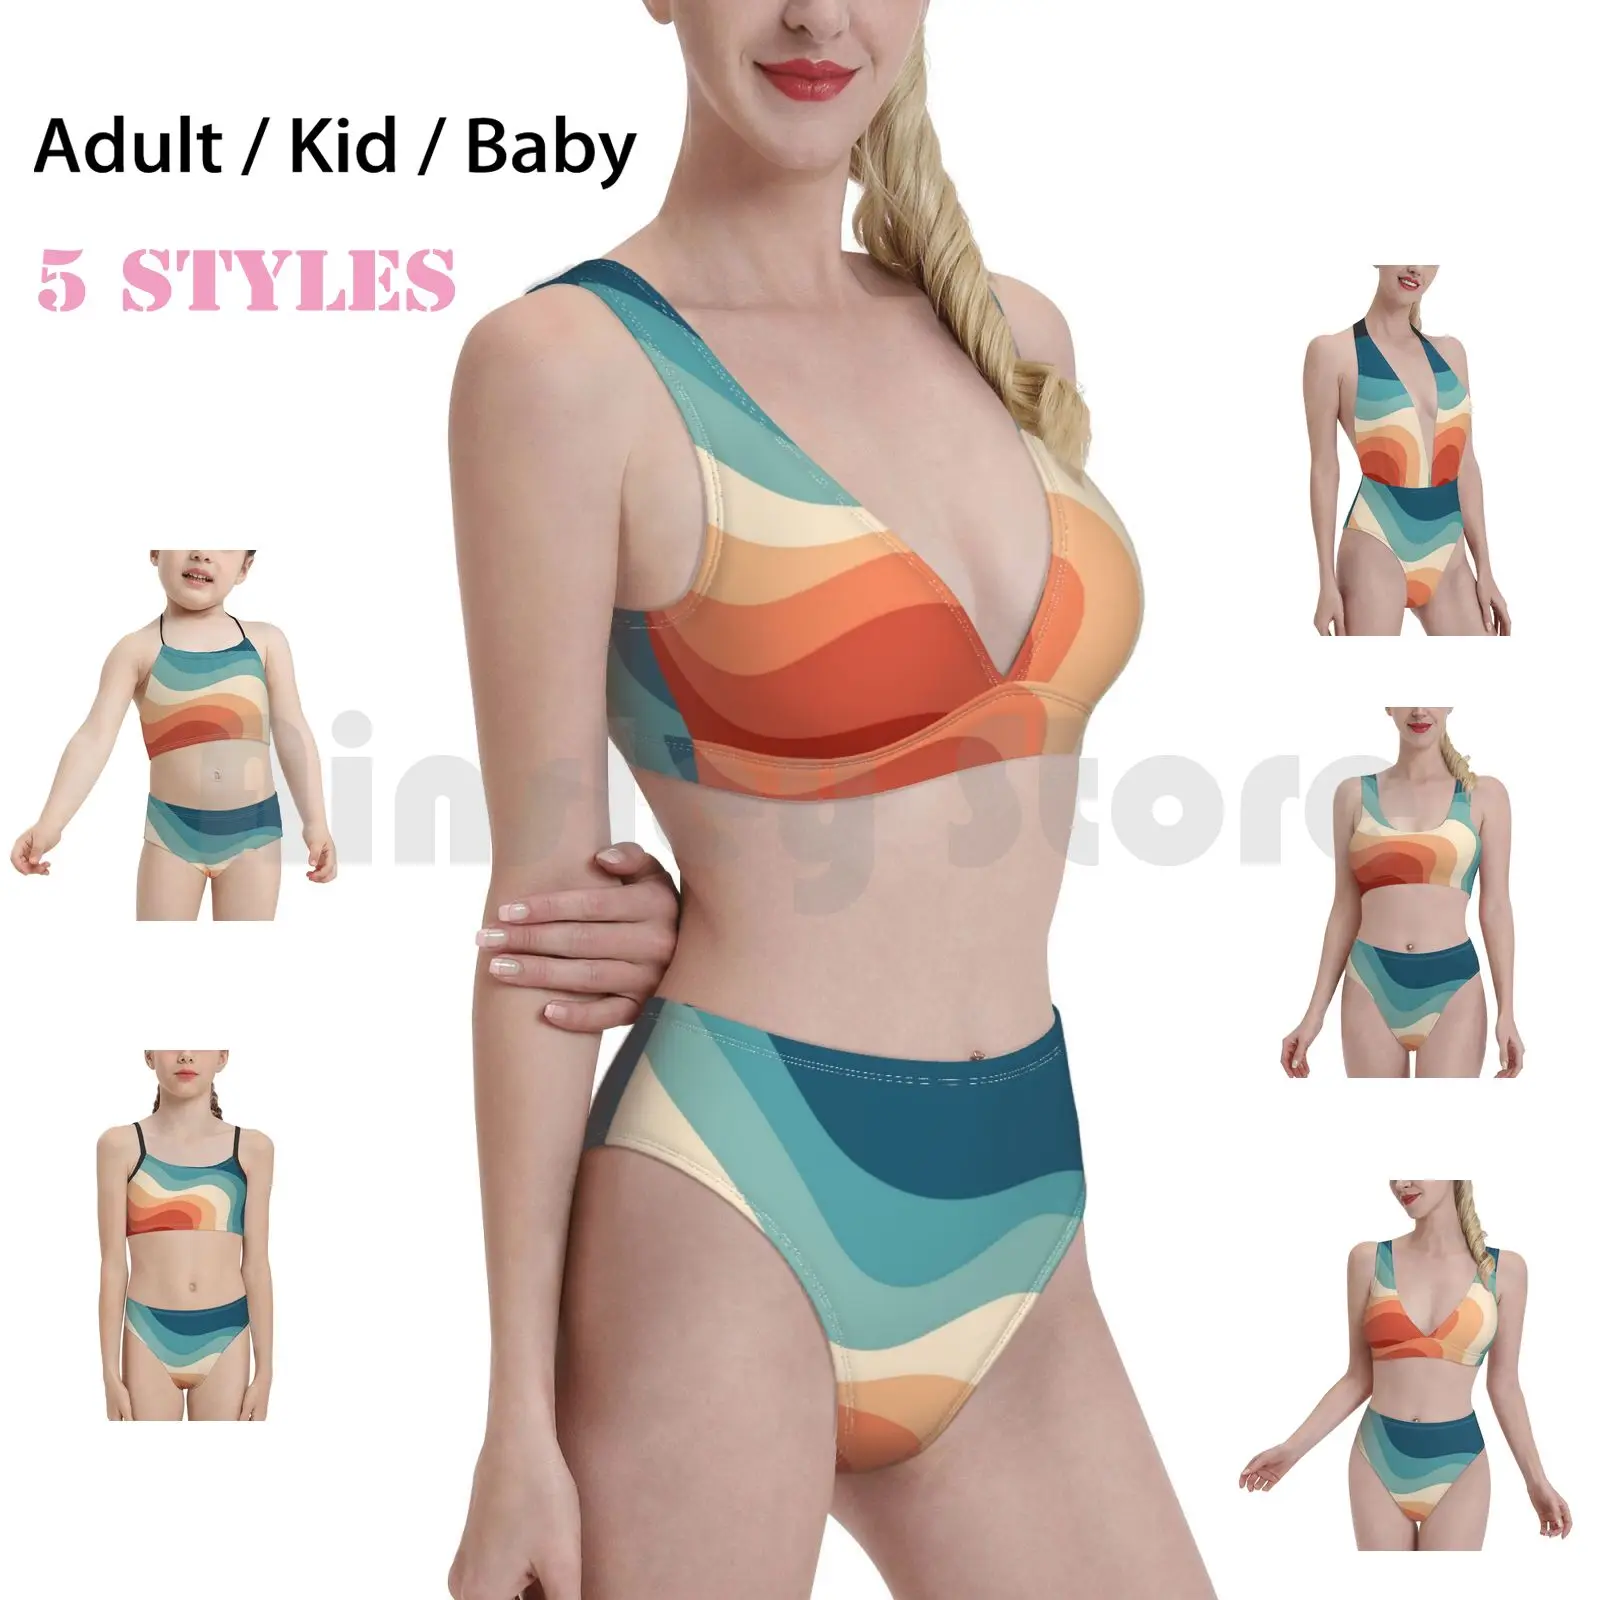 

Retro Style Waves Swimsuit Bikini Padded High Waist Retro Waves Waves Retro Stripes Striped Lines Colorful Abstract